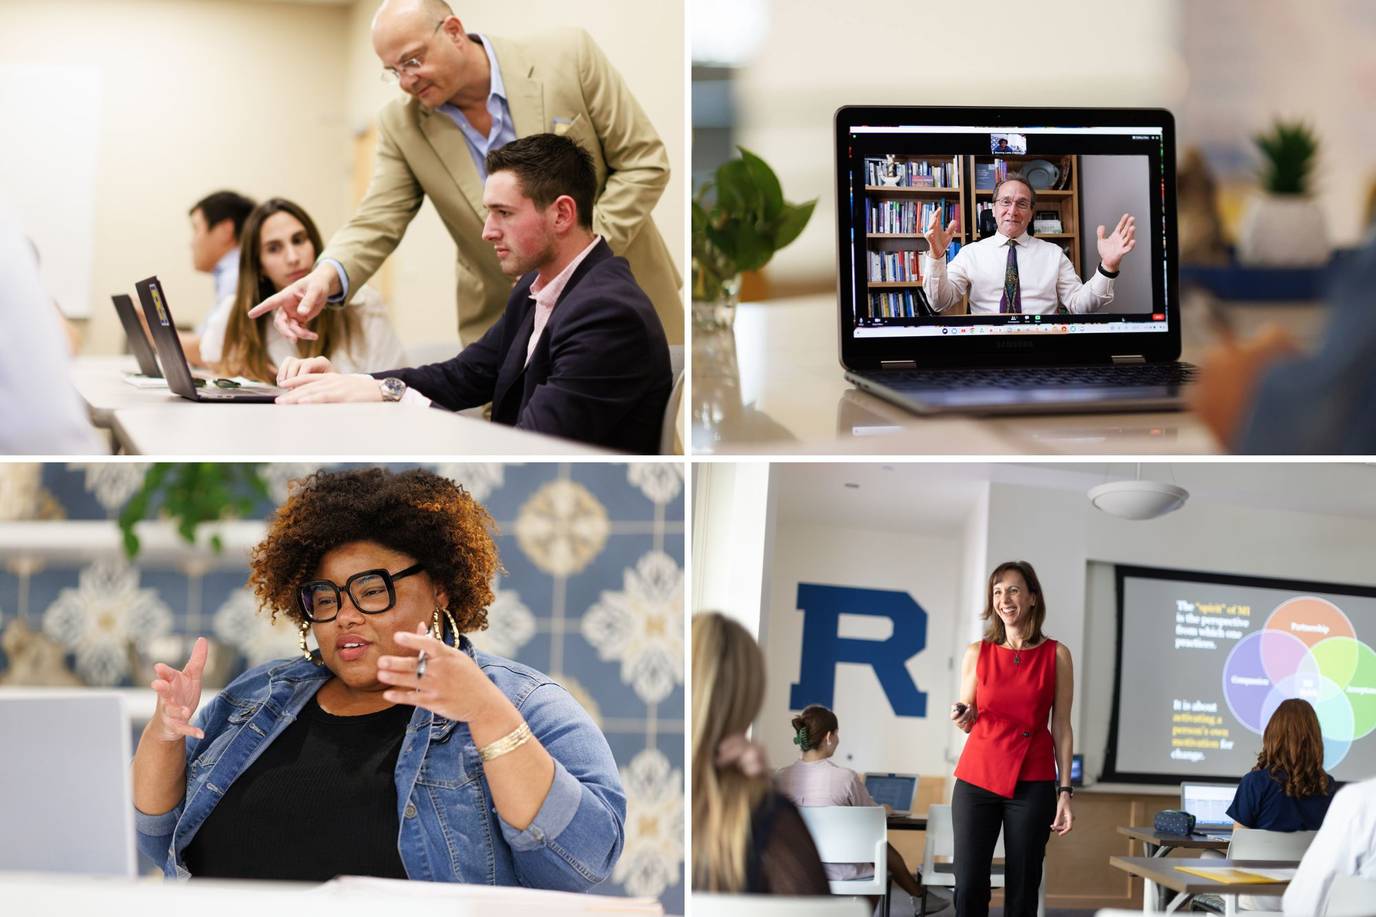 A grid of images depicting both in-person and online classroom environments.